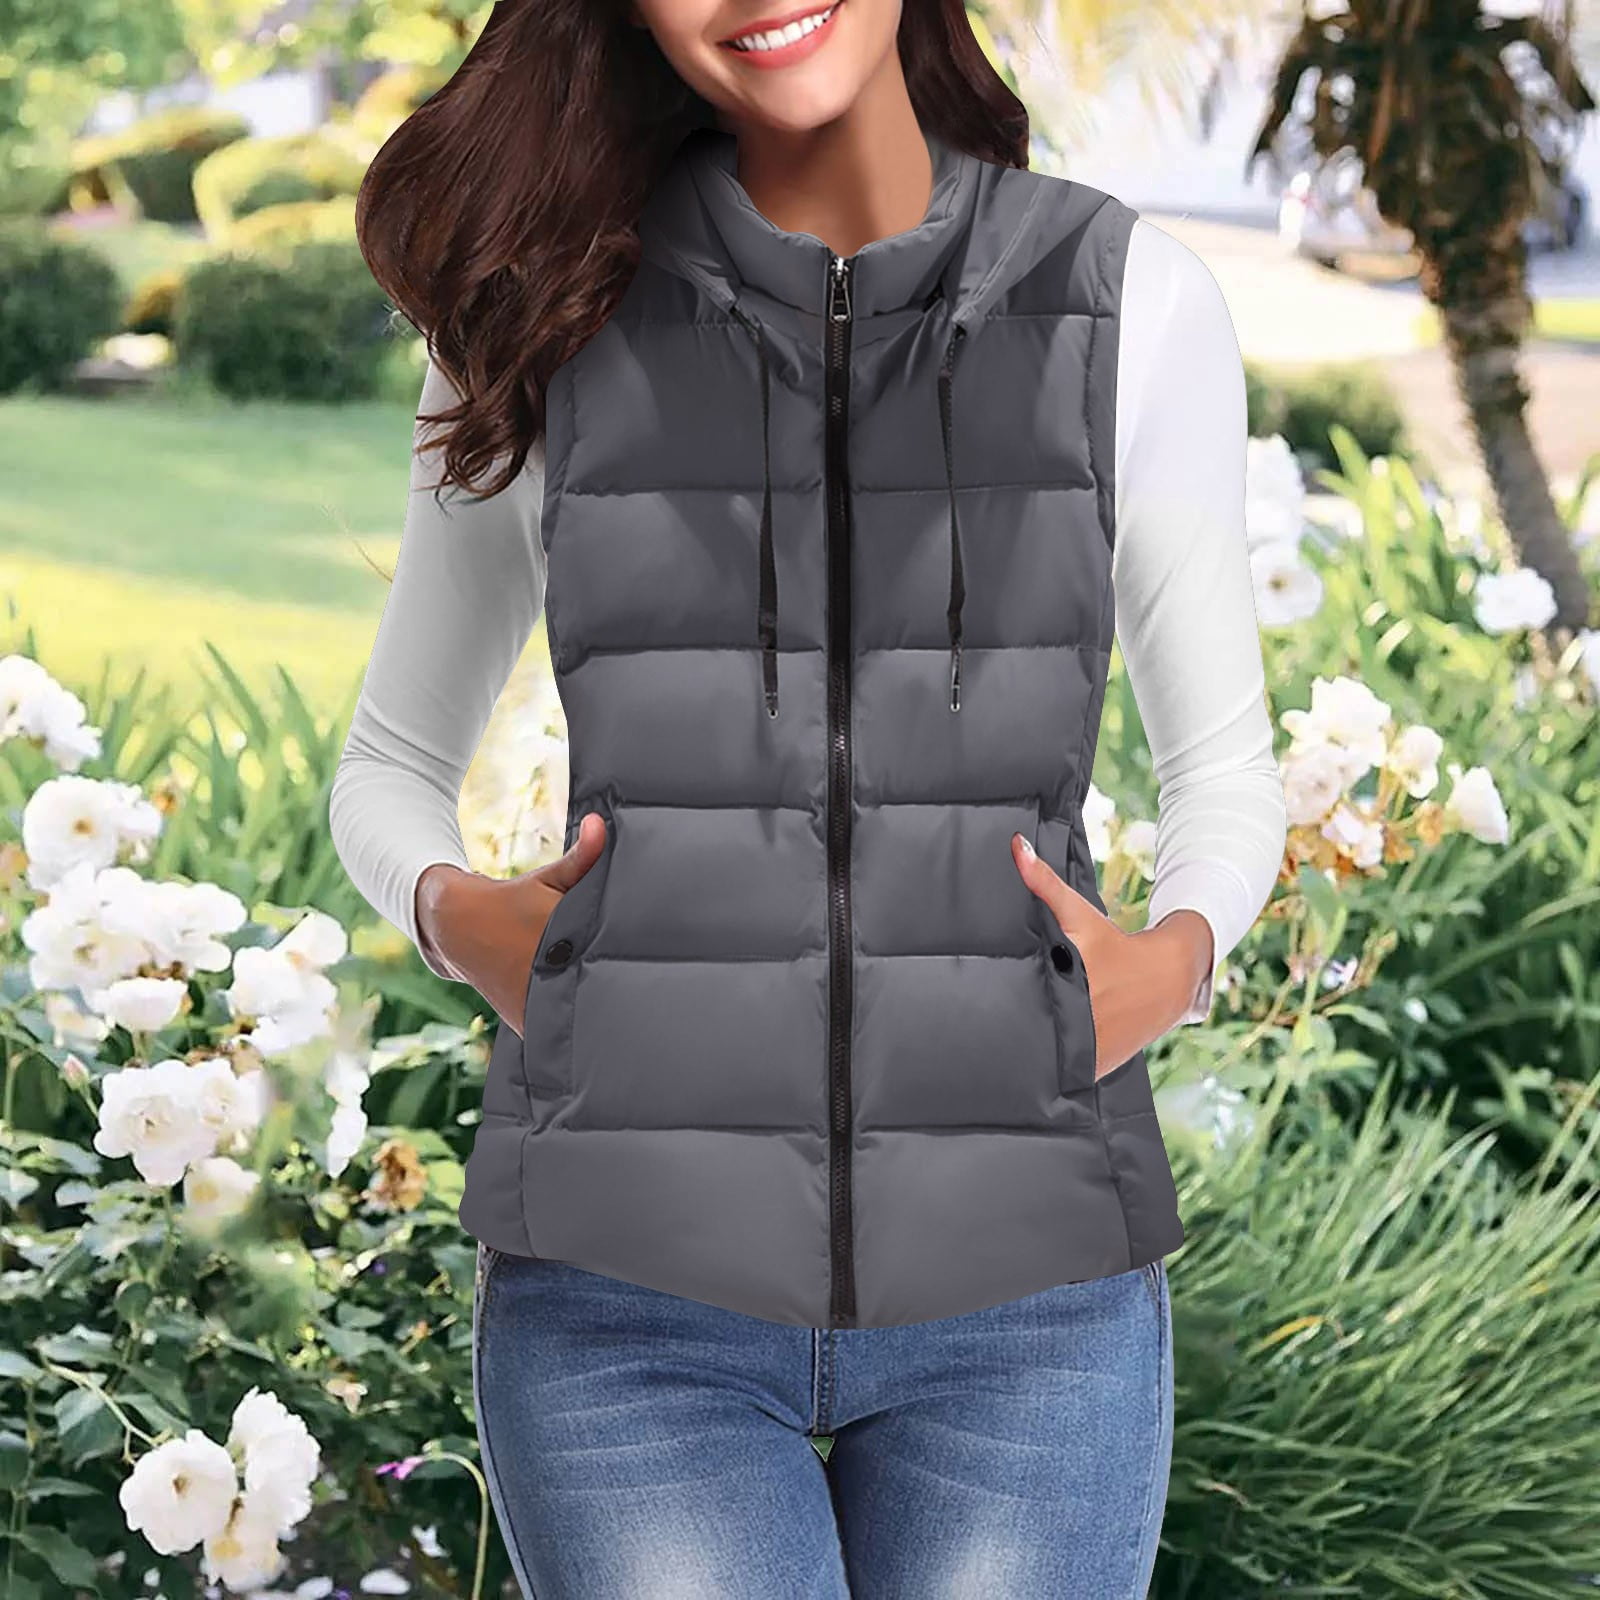 CAICJ98 Oversized Vests For Women Women's Lightweight Puffer Vest Windproof  Sleeveless Vest for Hiking Travel Running Outerwear with Pockets Grey,3XL 